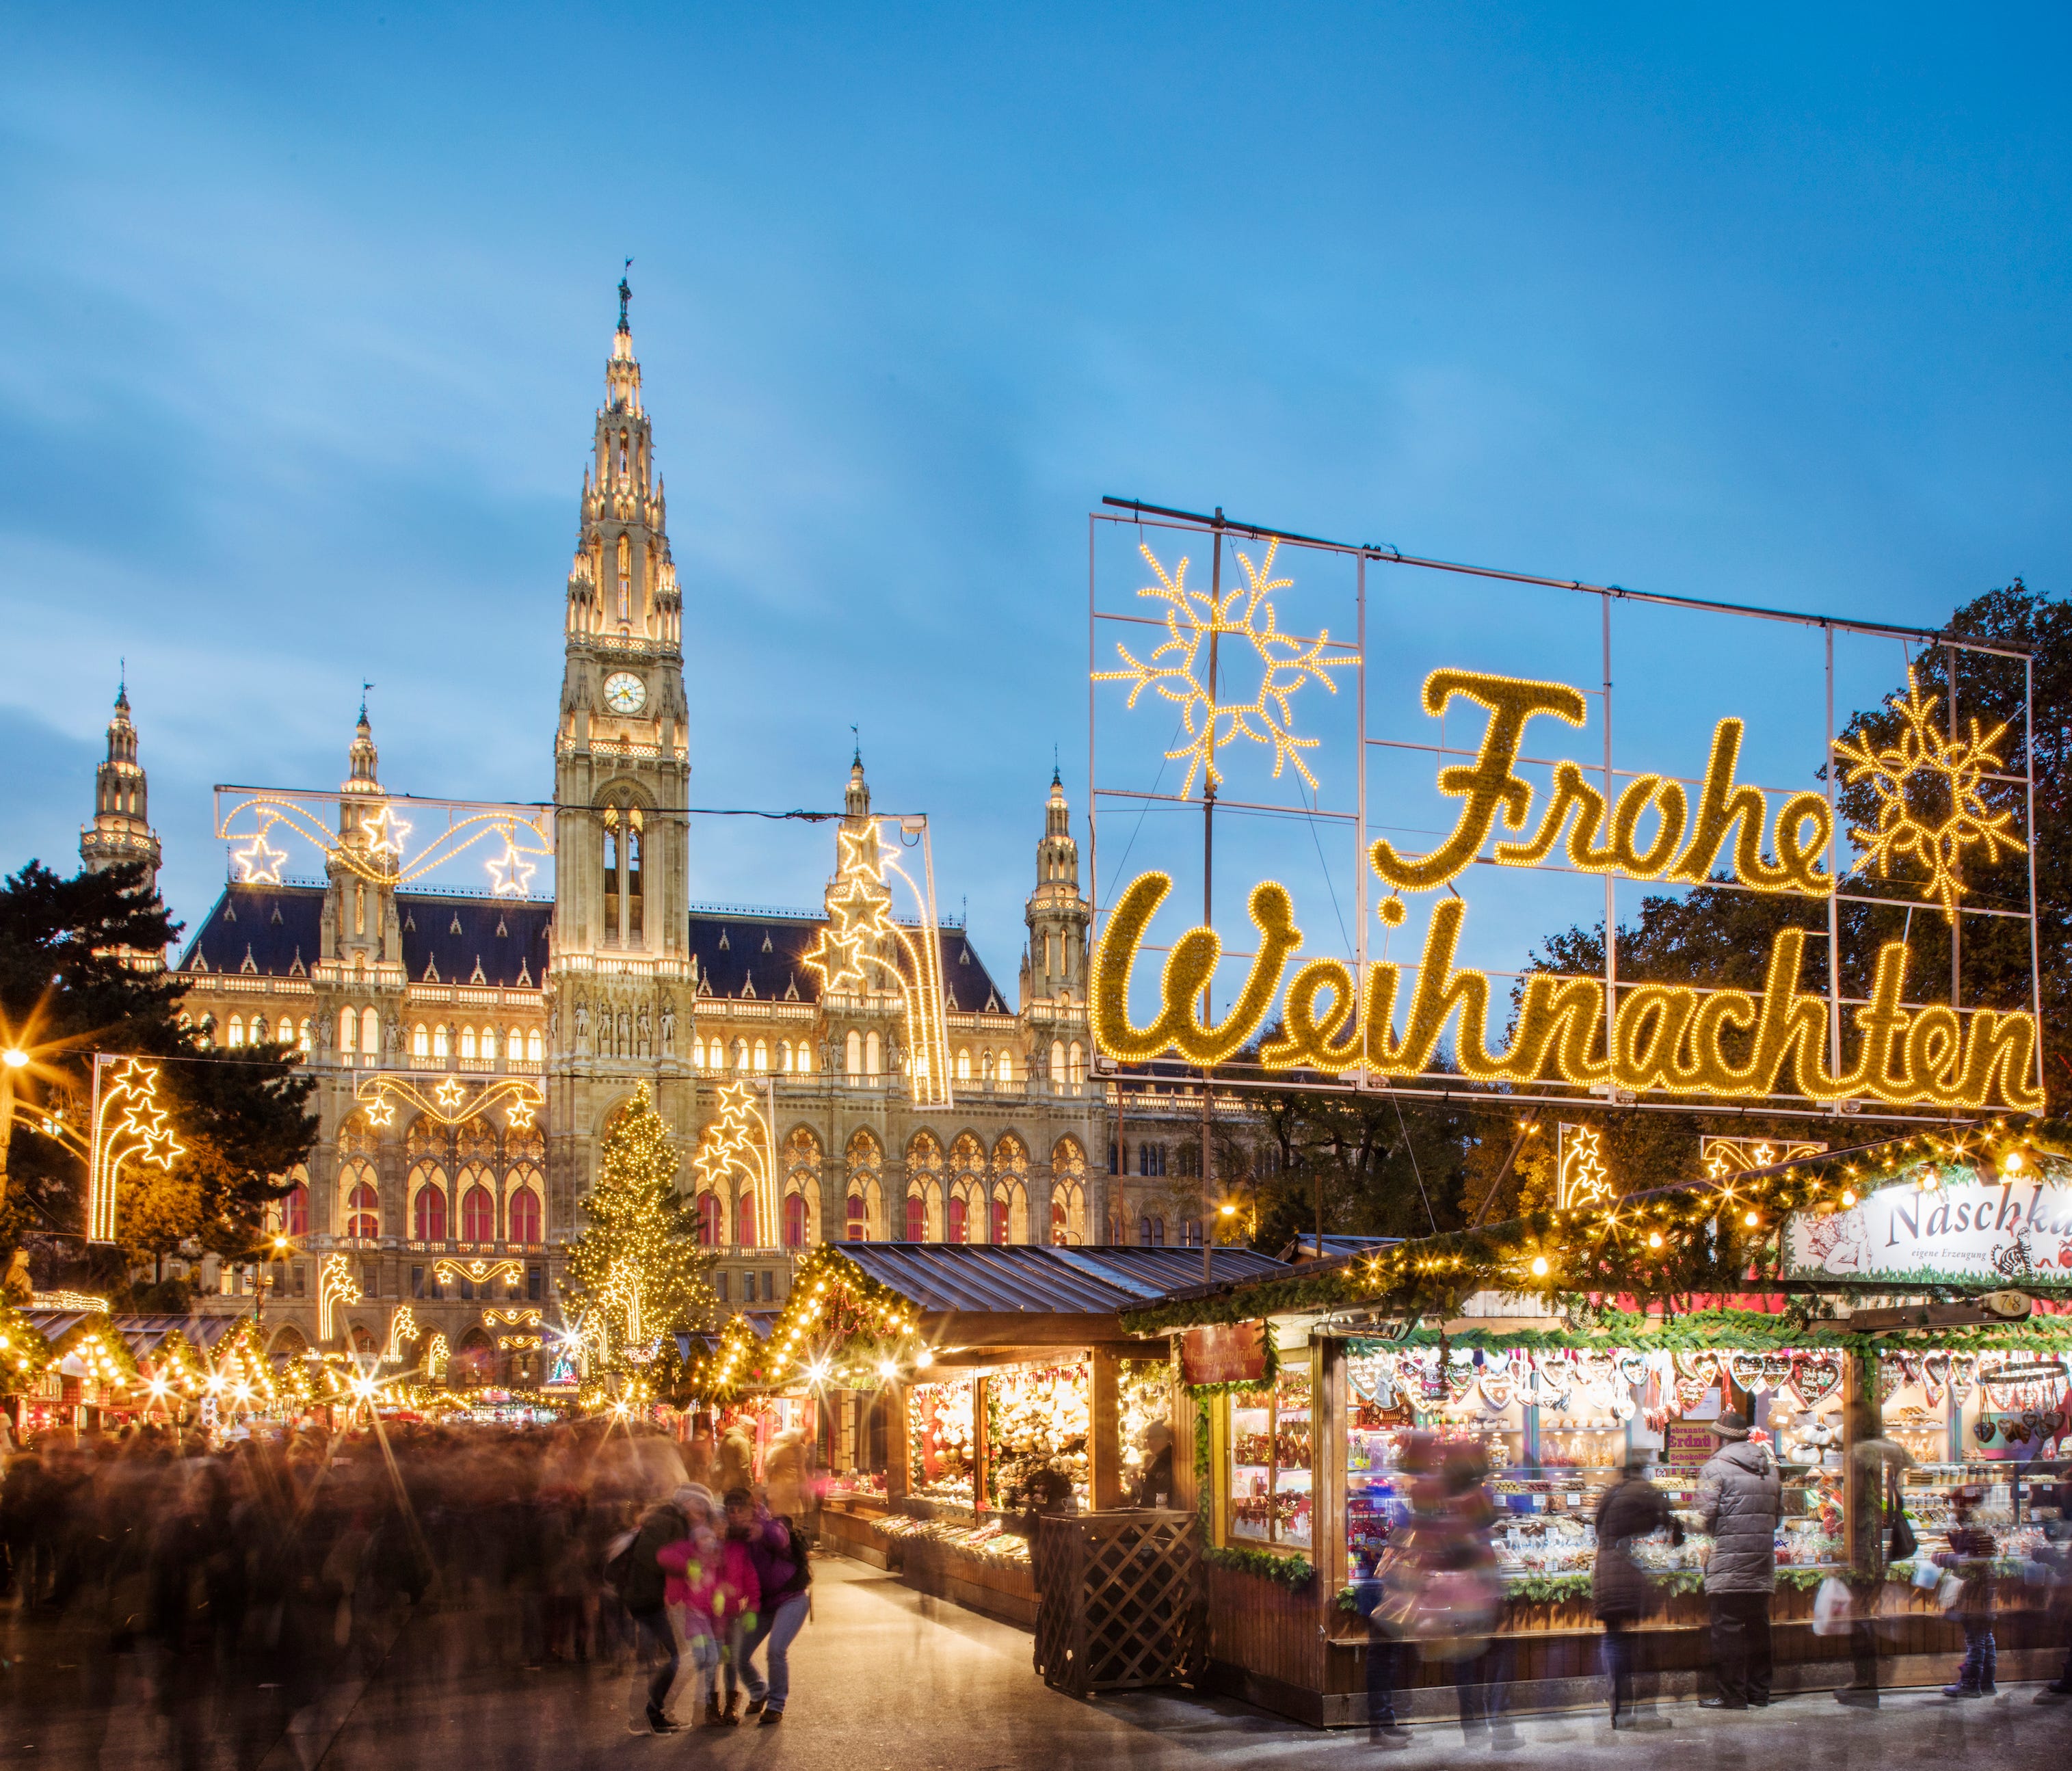 Vienna, Austria, has several options for Christmas markets, and the most impressive is the one on the Rathausplatz, the square in front of City Hall, which can be traced back to the year 1298. The 150 booths offer gifts, Christmas tree decorations, h